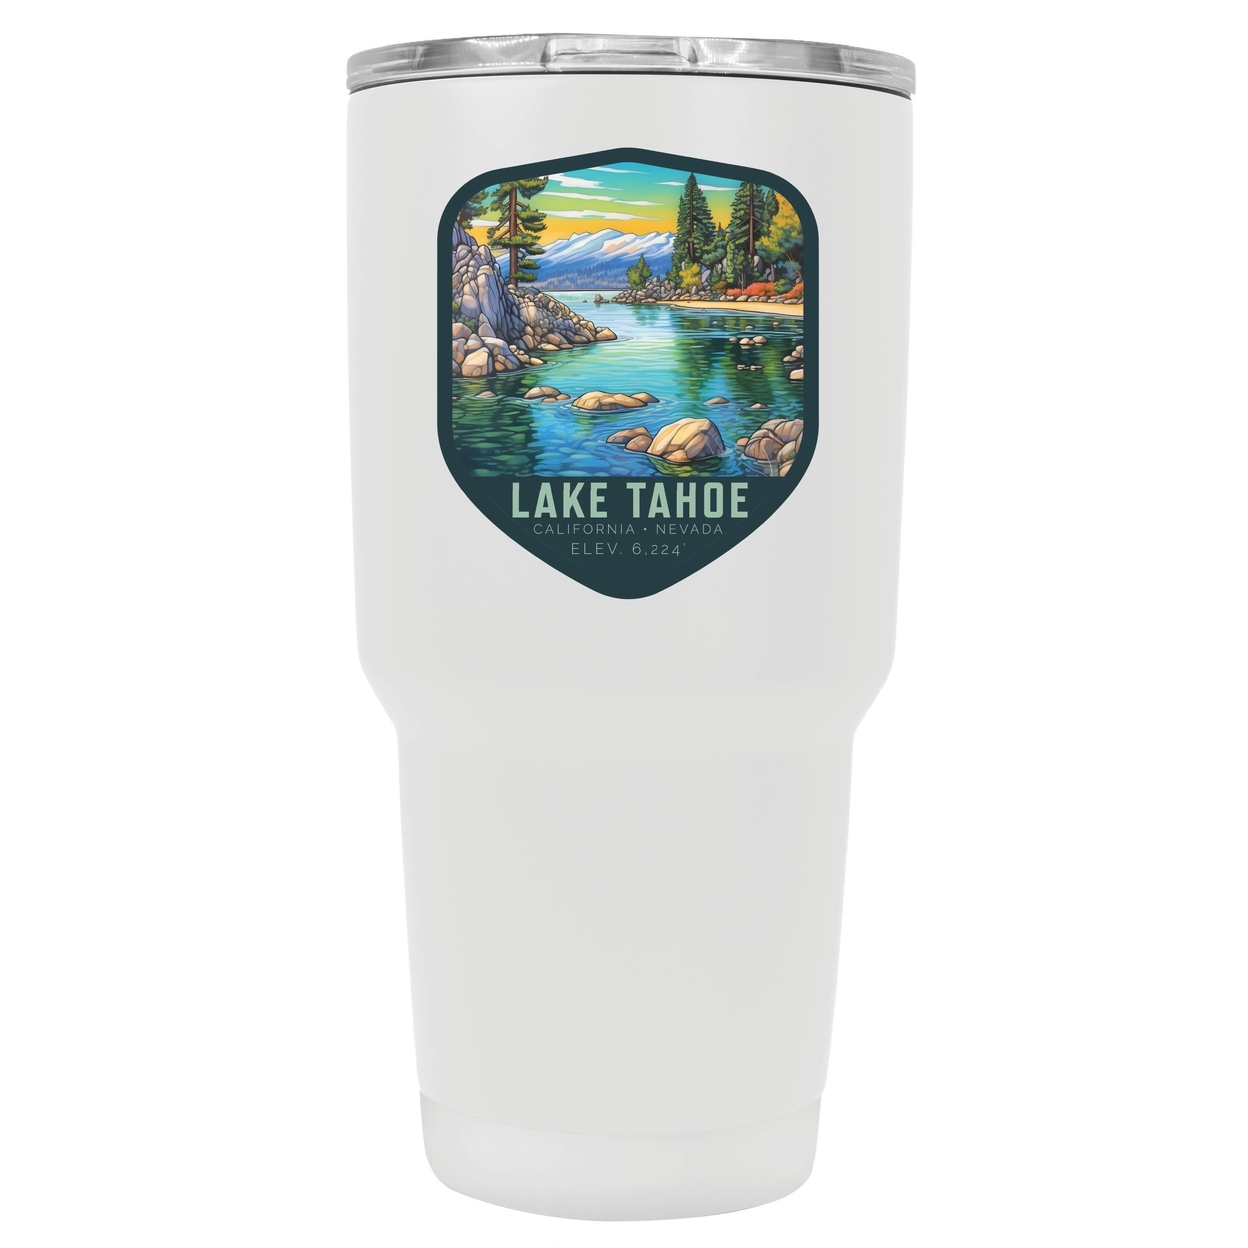 Tulane University Green Wave Proud Mom 24 Oz Insulated Stainless Steel Tumblers Choose Your Color. - Seafoam,,Single